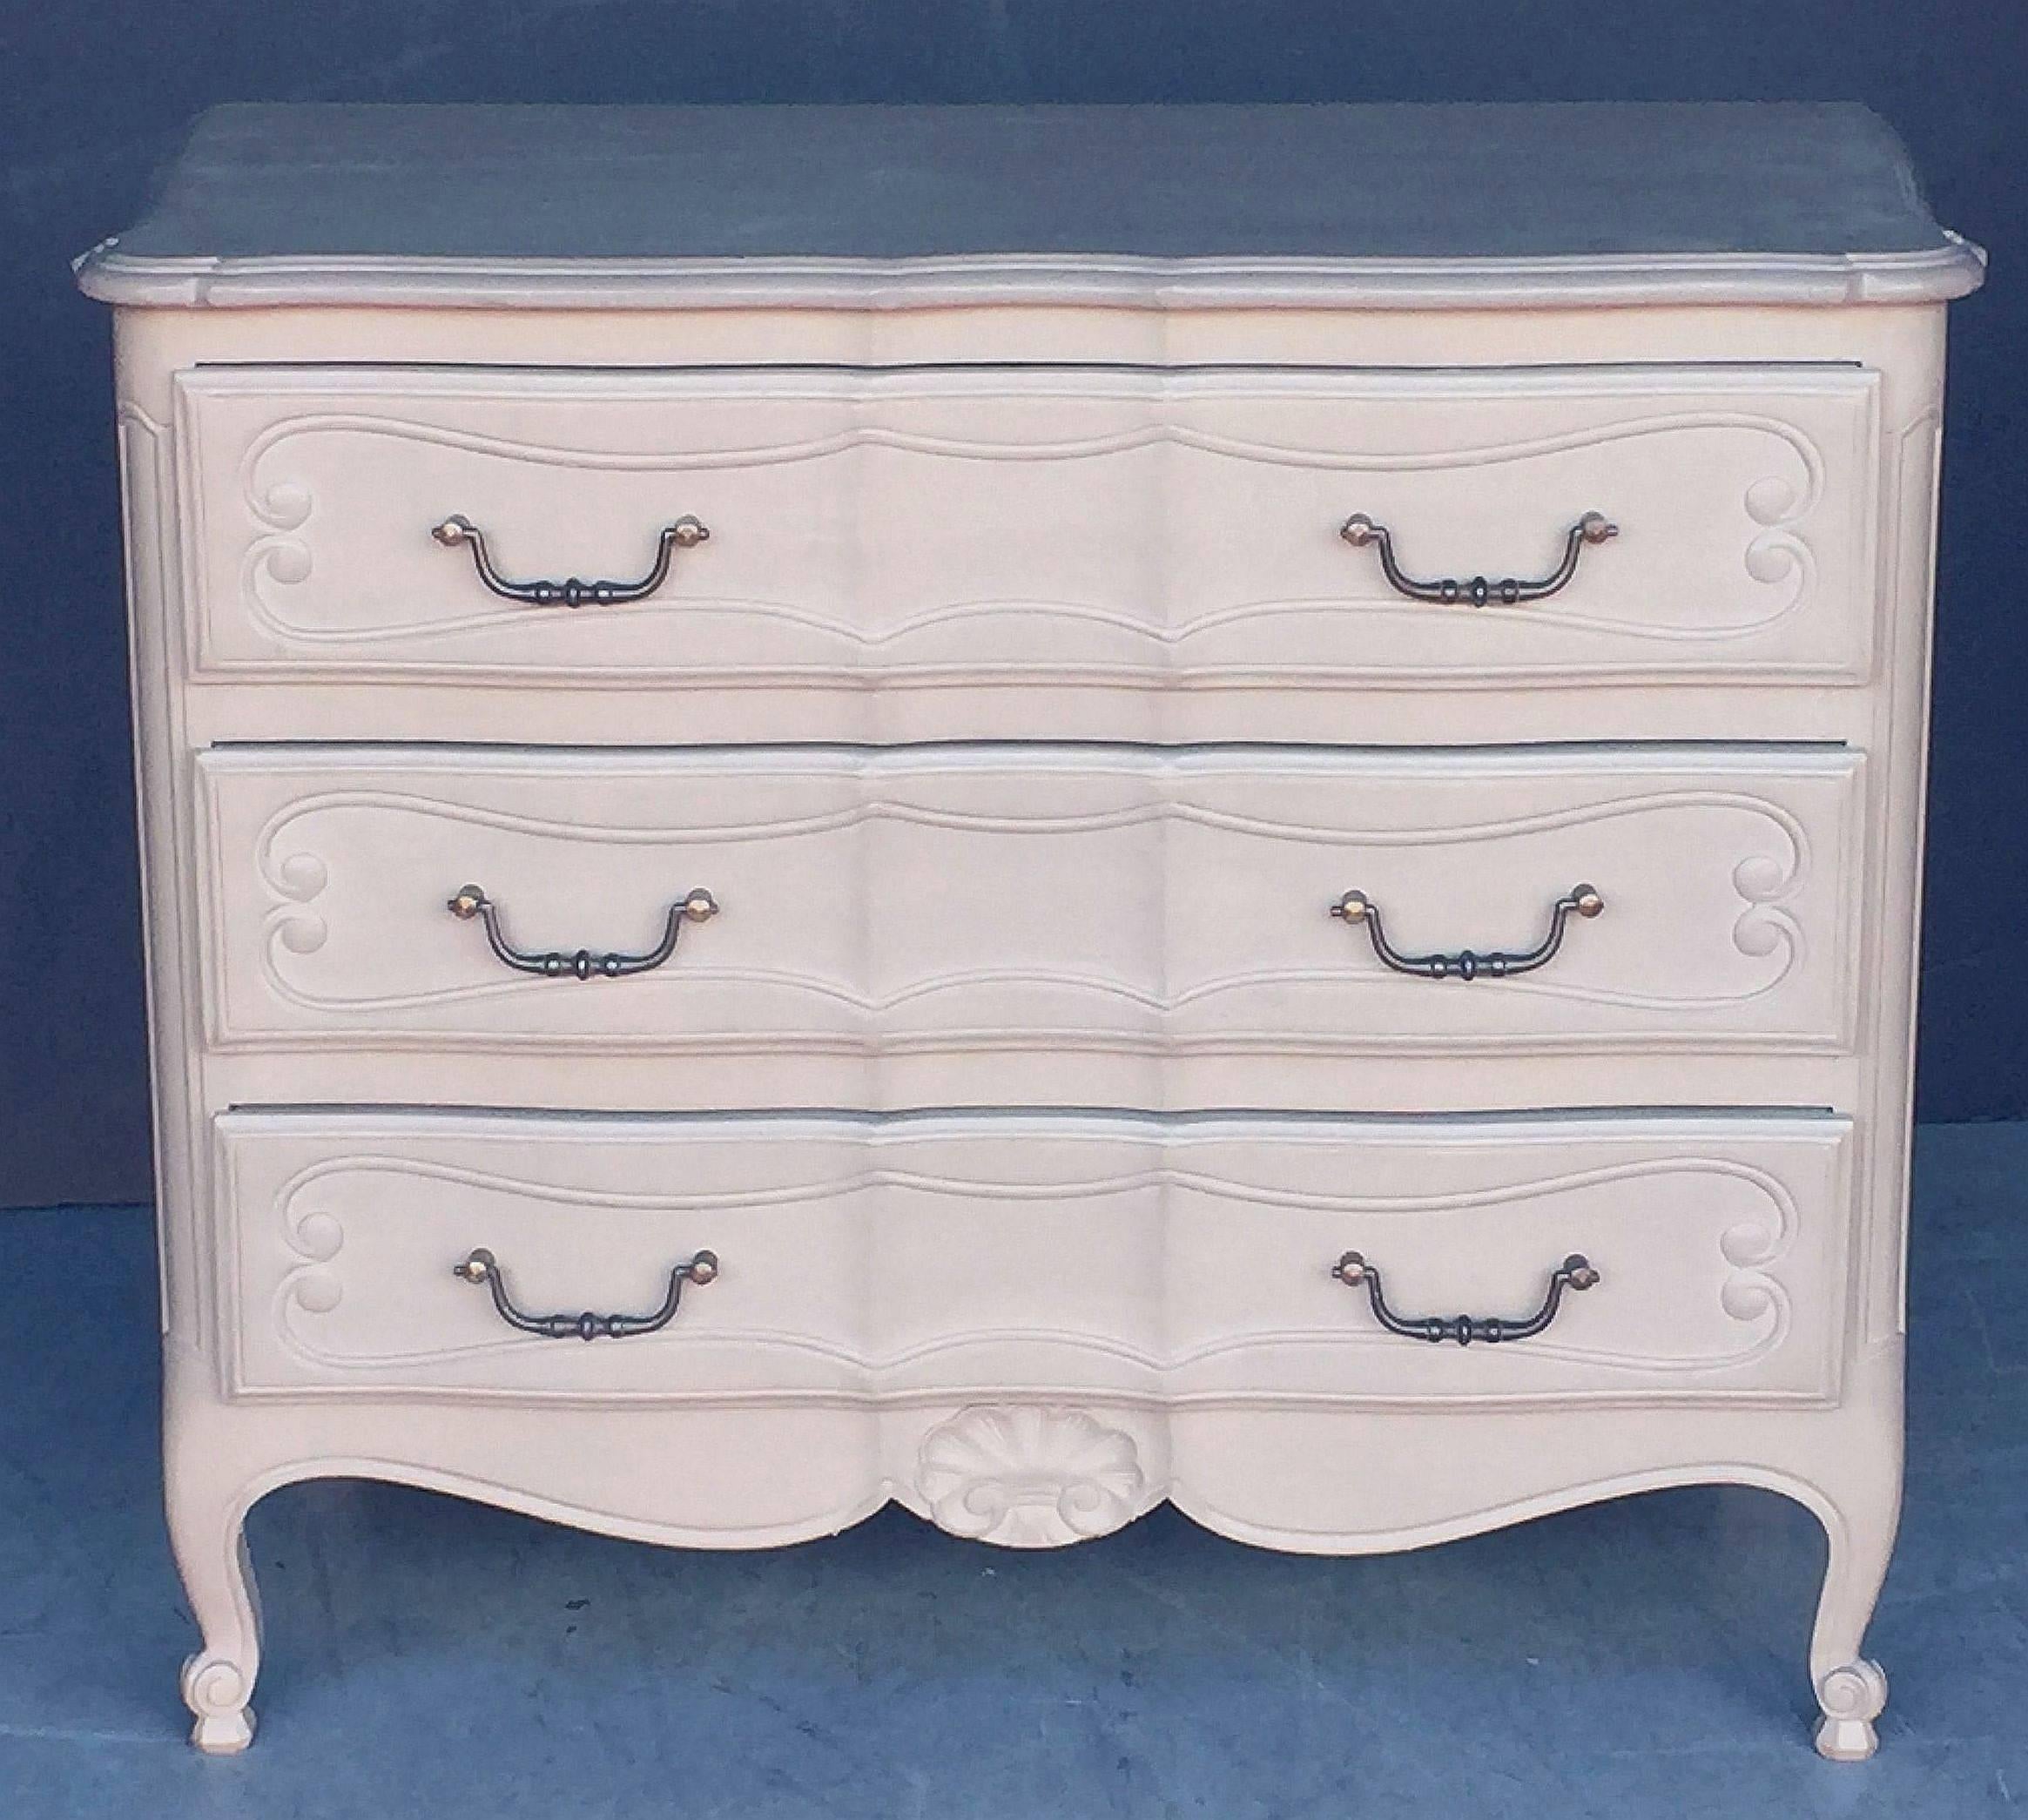 A fine French painted chest of drawers or commode, featuring a moulded top with serpentine edge, over a frieze of three drawers with paneled sides, each drawer with inset scroll design and swan handles, carved shell on the base and resting on facing